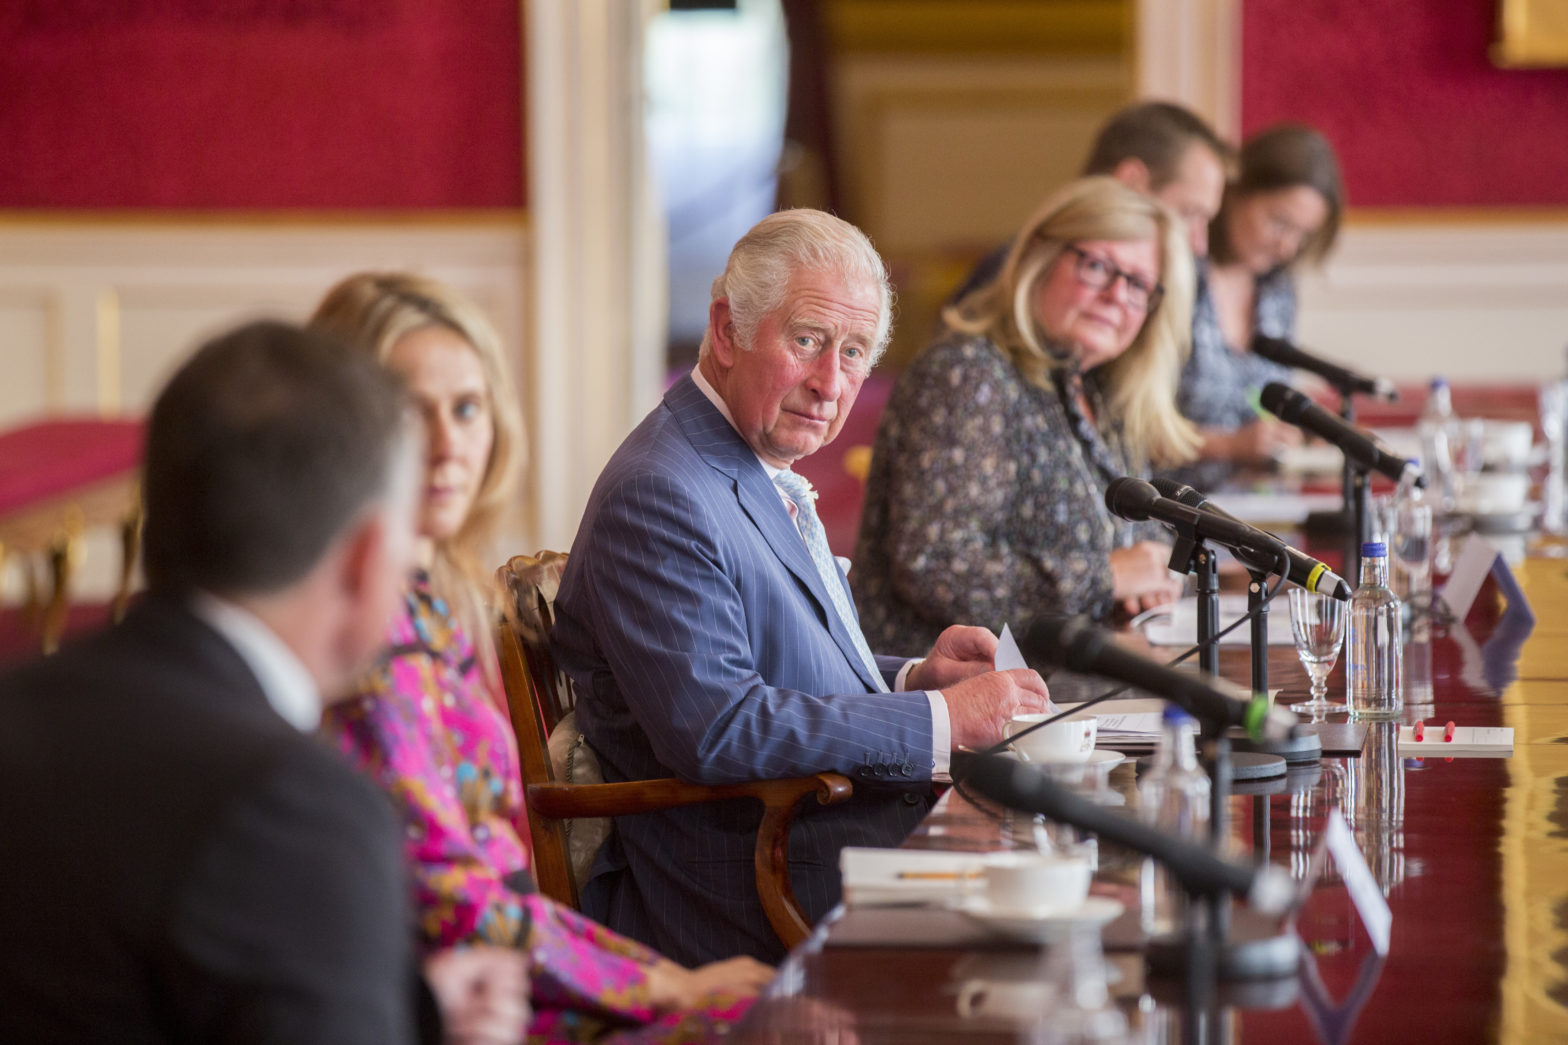 CWEIC joins Future of Work session with HRH The Prince of Wales